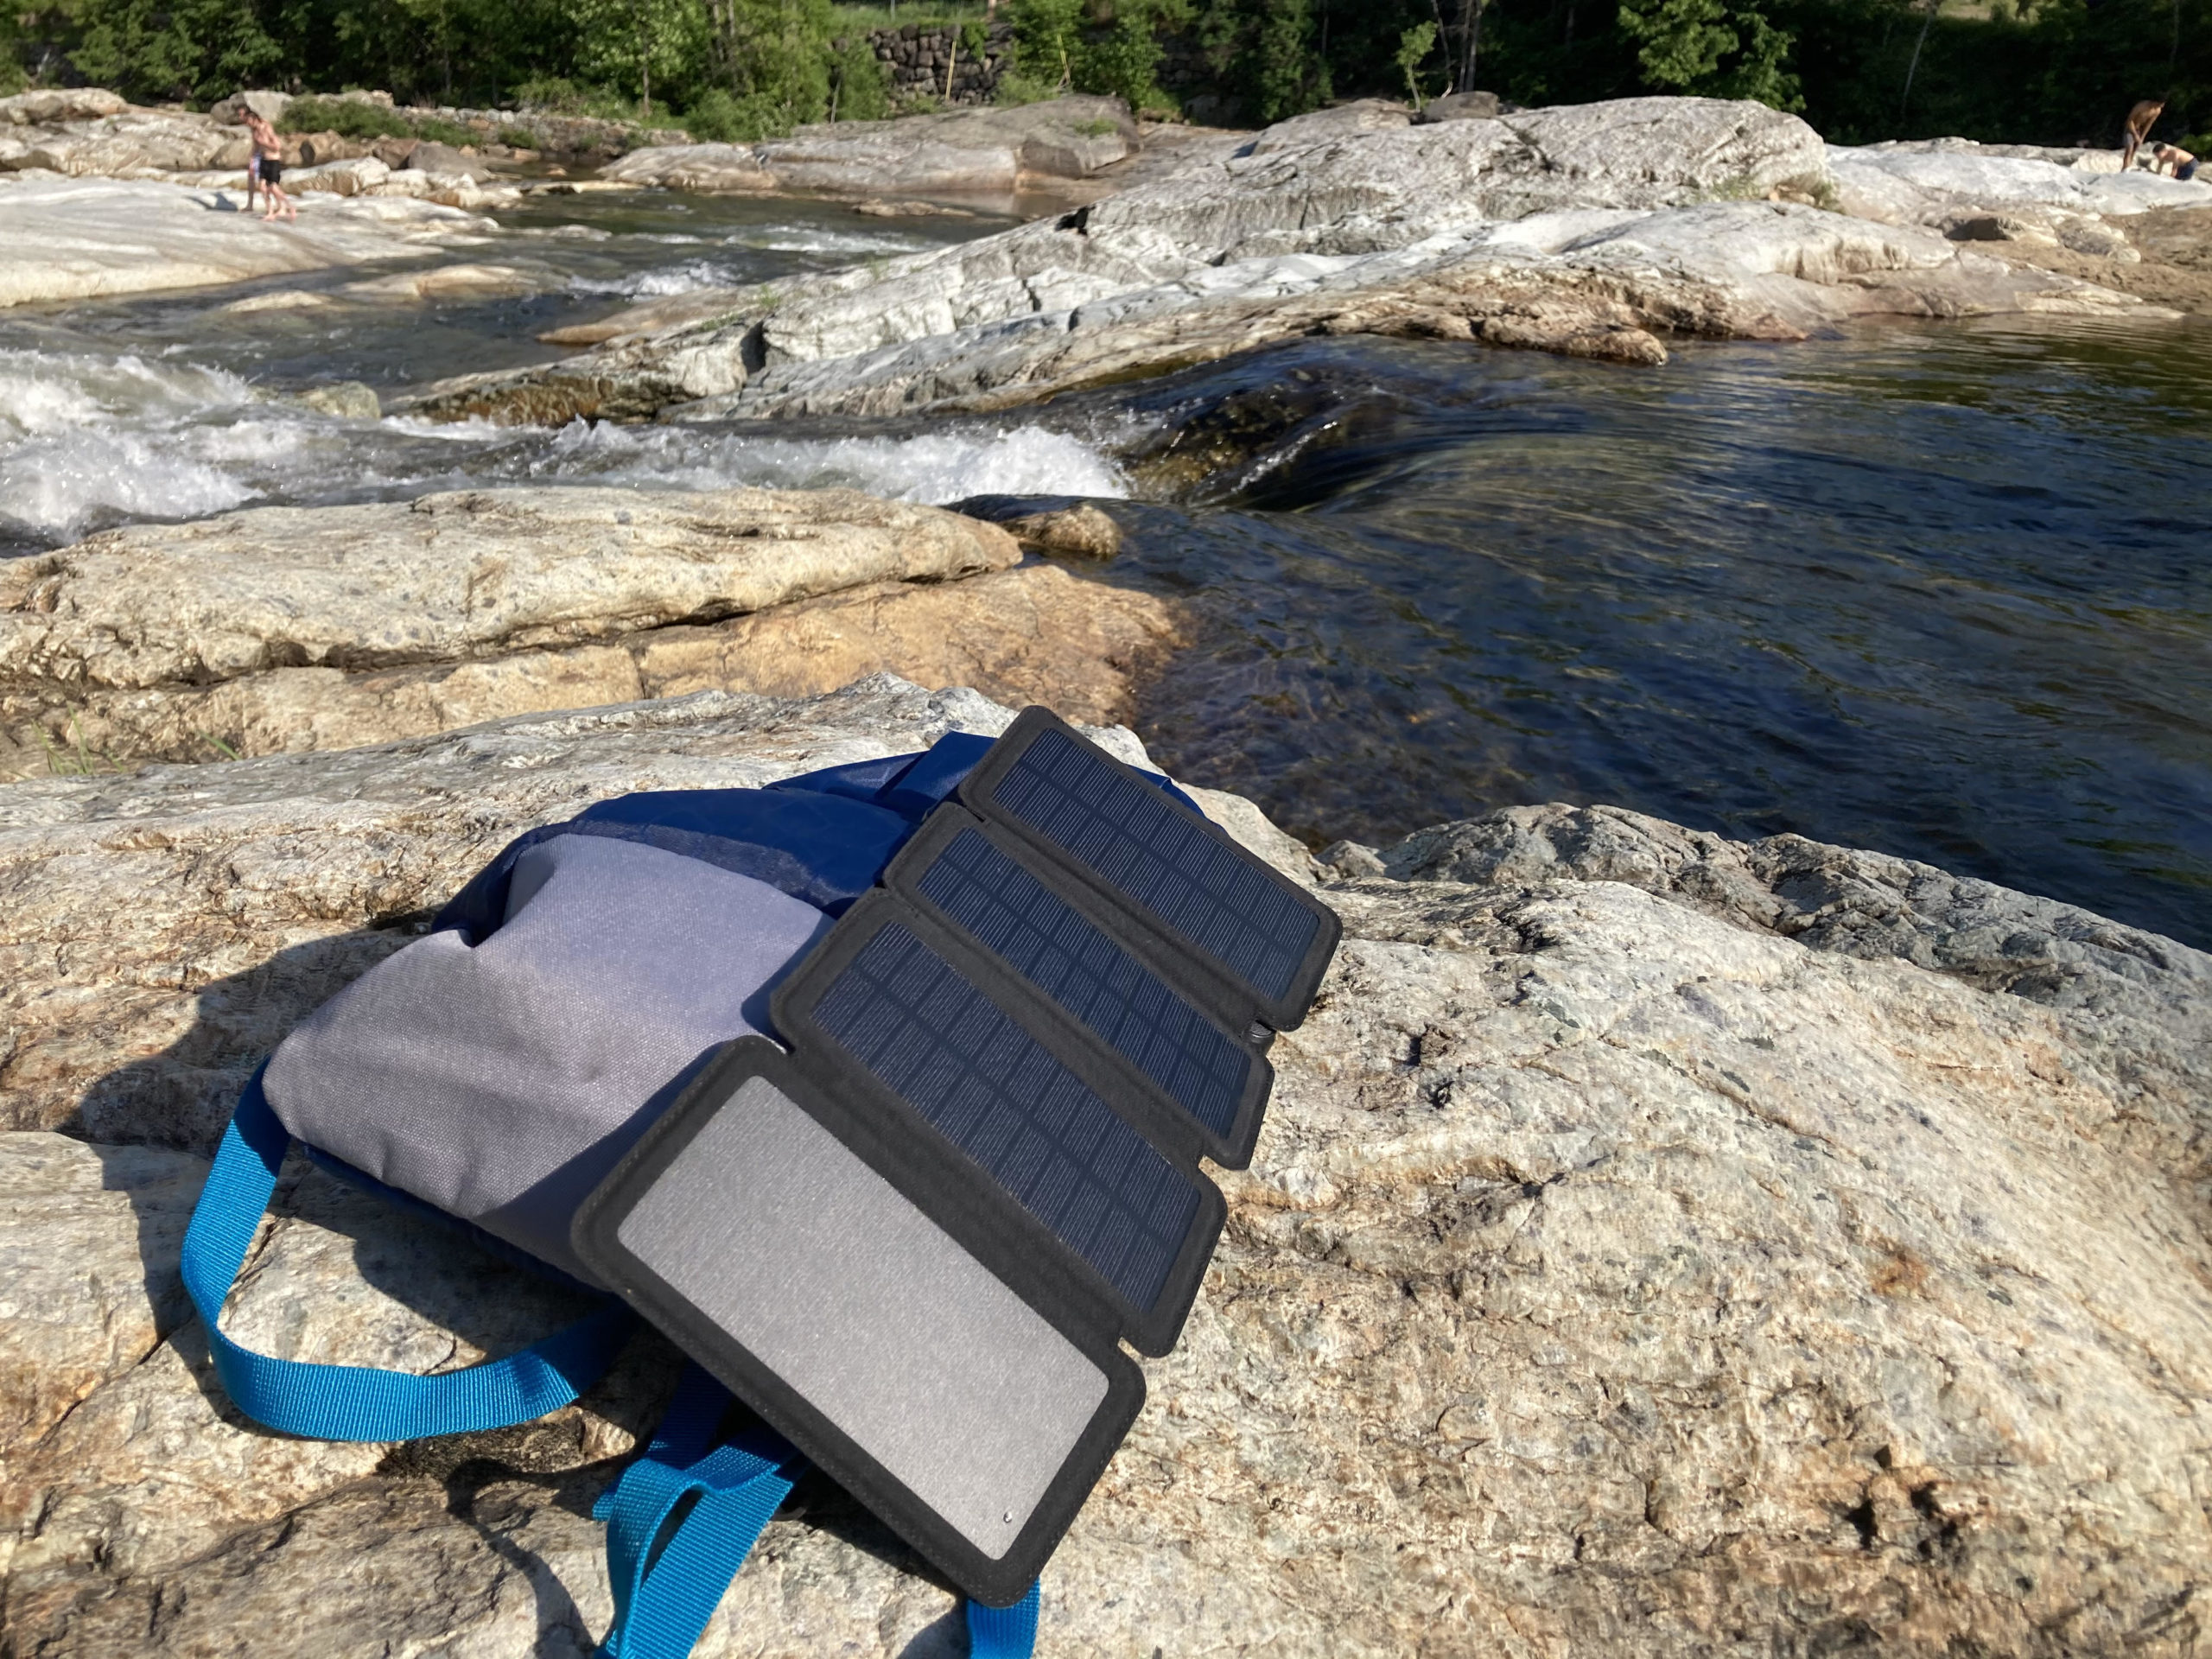 Solar power for the great outdoors